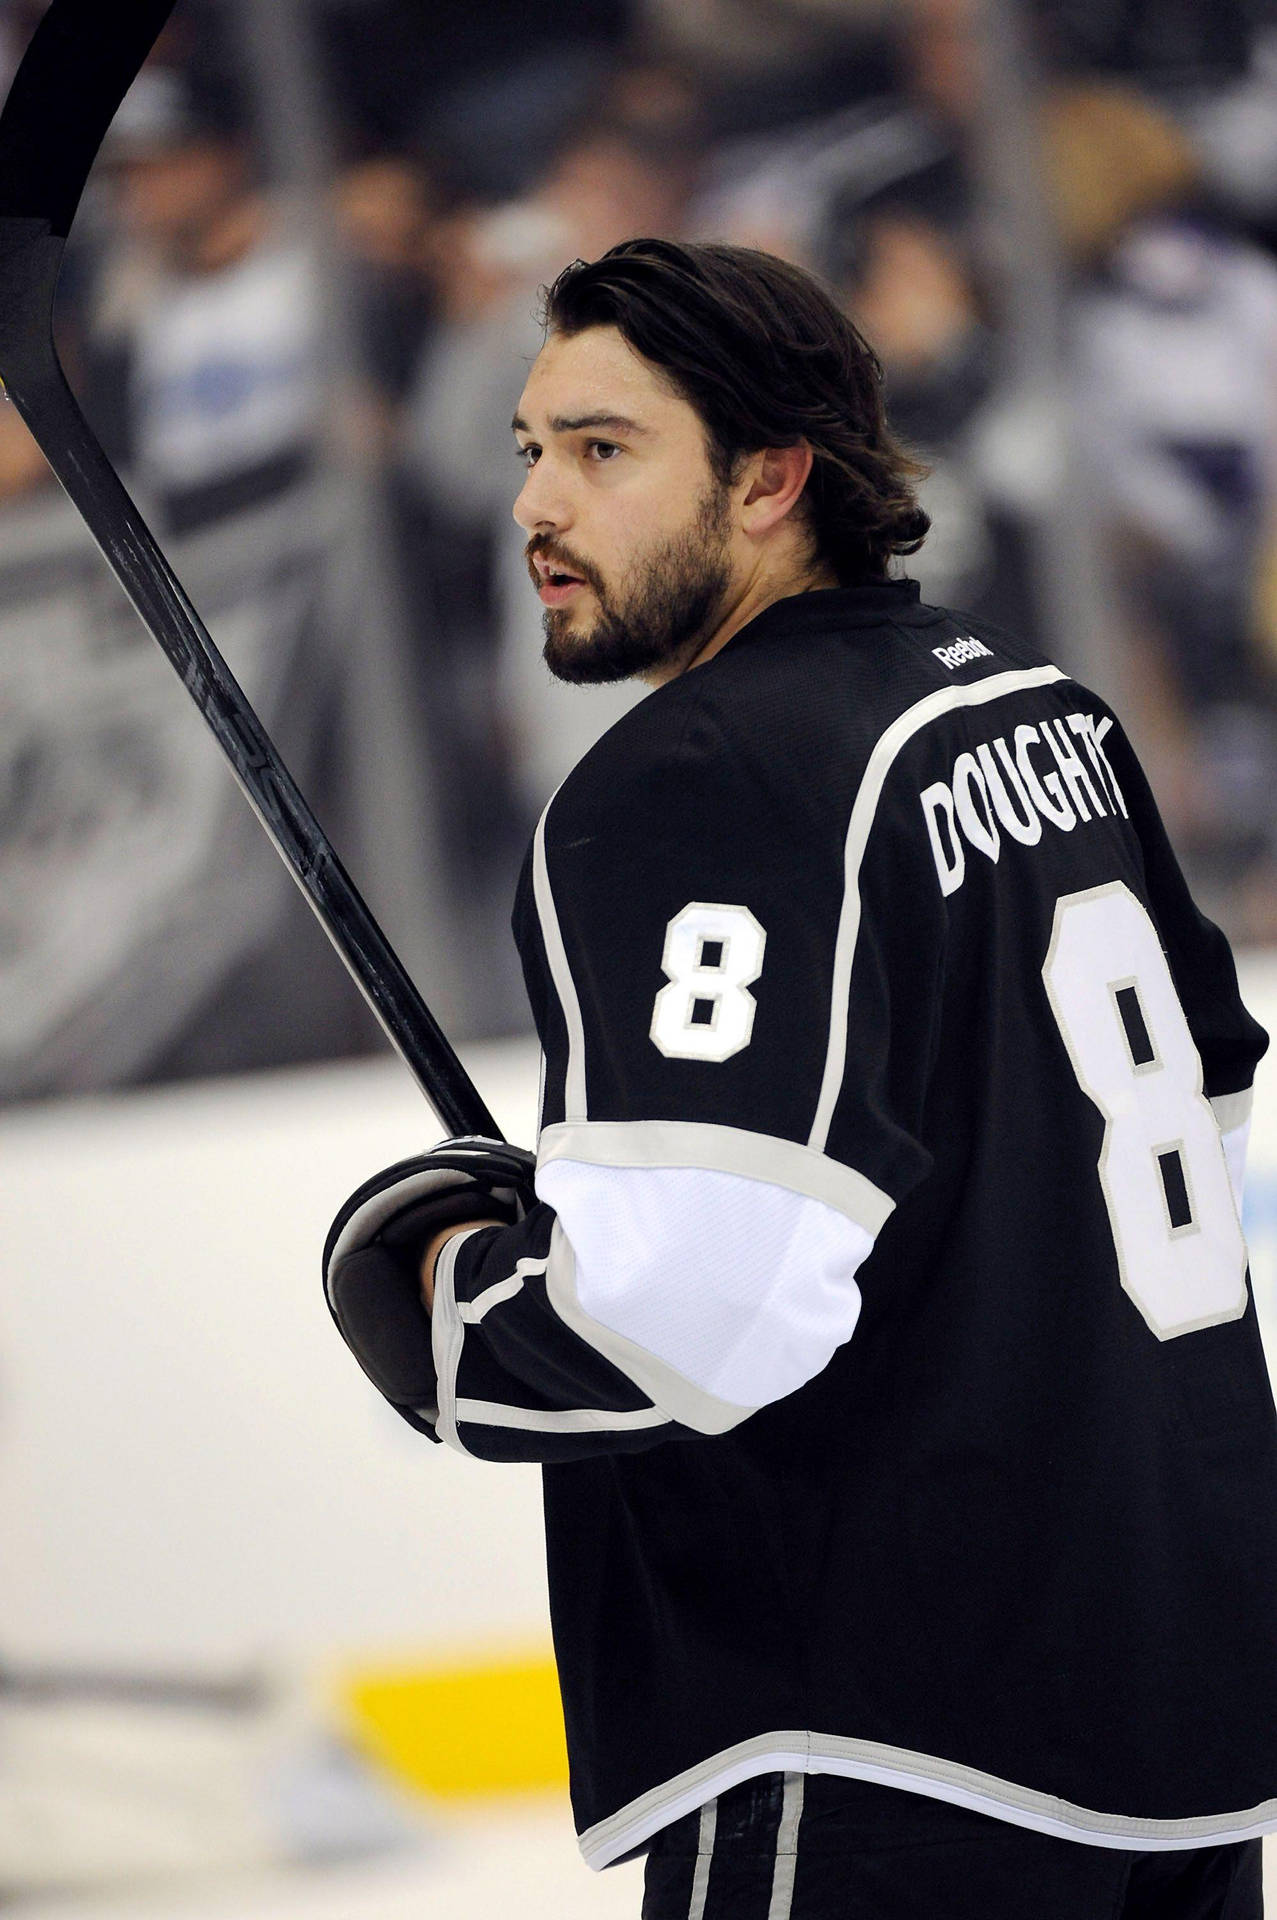 Drew Doughty - Focused on the game with hockey stick in hand. Wallpaper